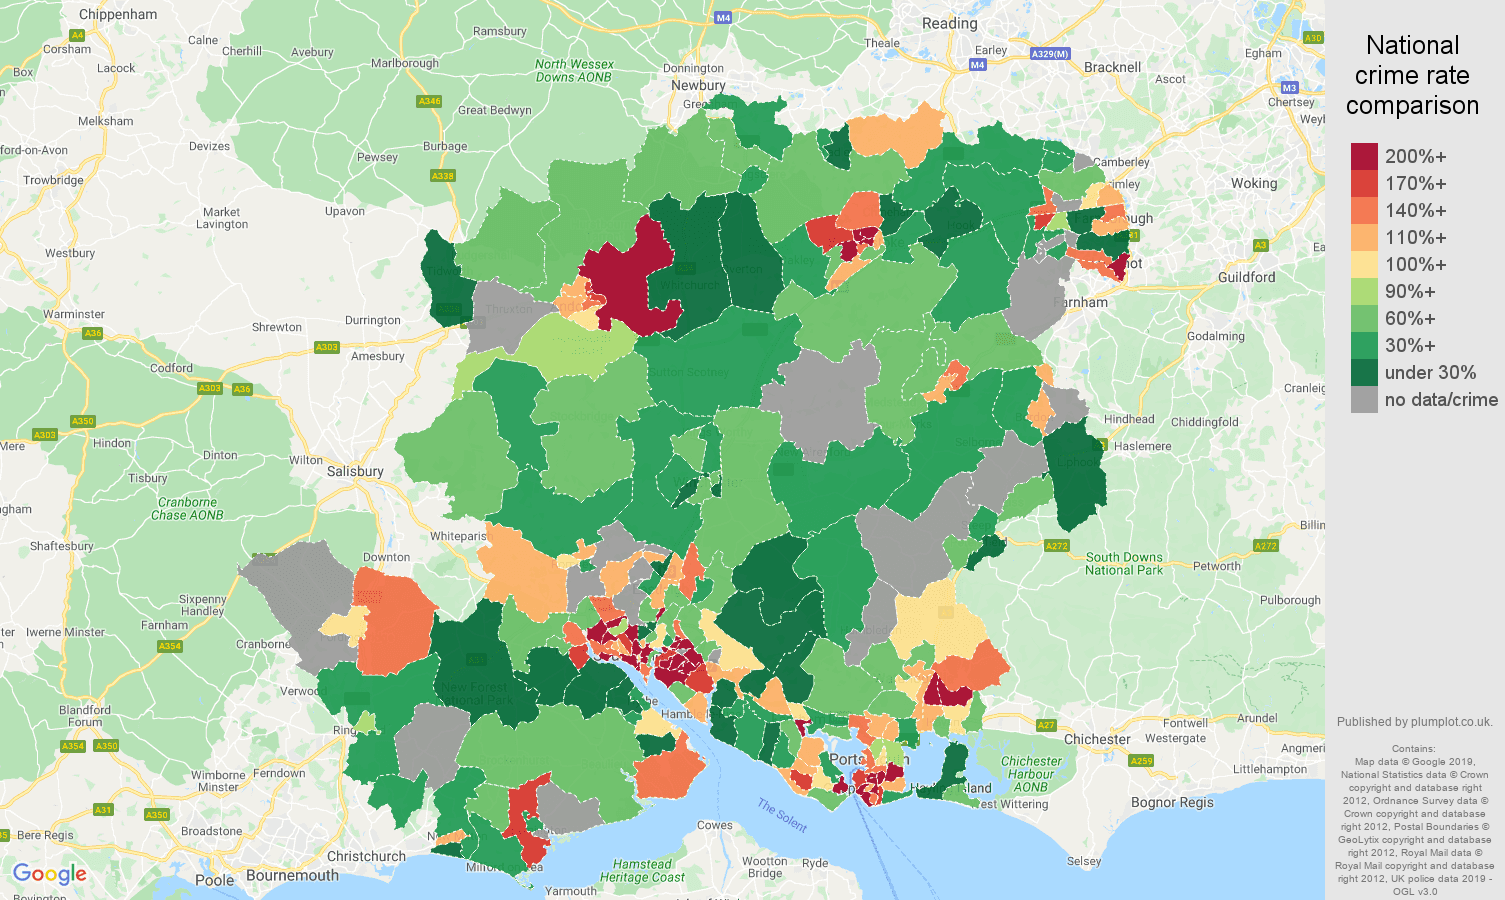 Hampshire possession of weapons crime rate comparison map